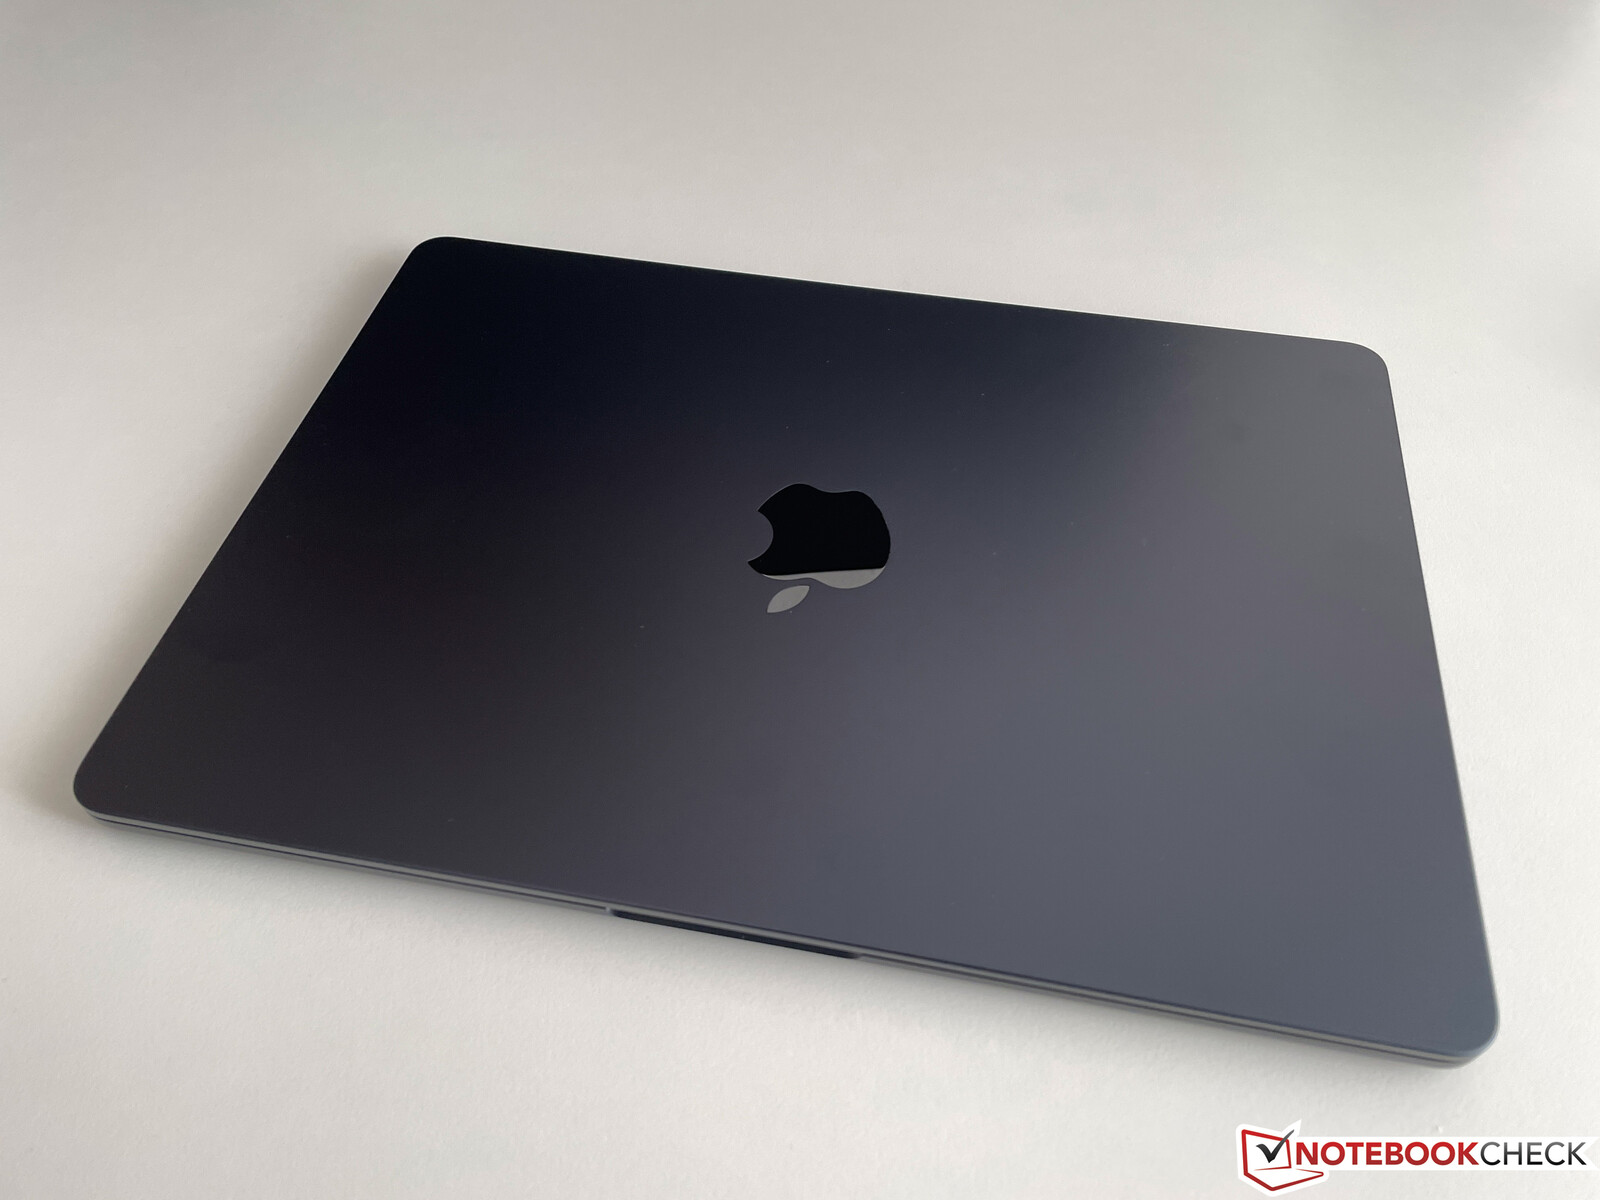 Some MacBook Air M2 reviewers warn about easily scratchable